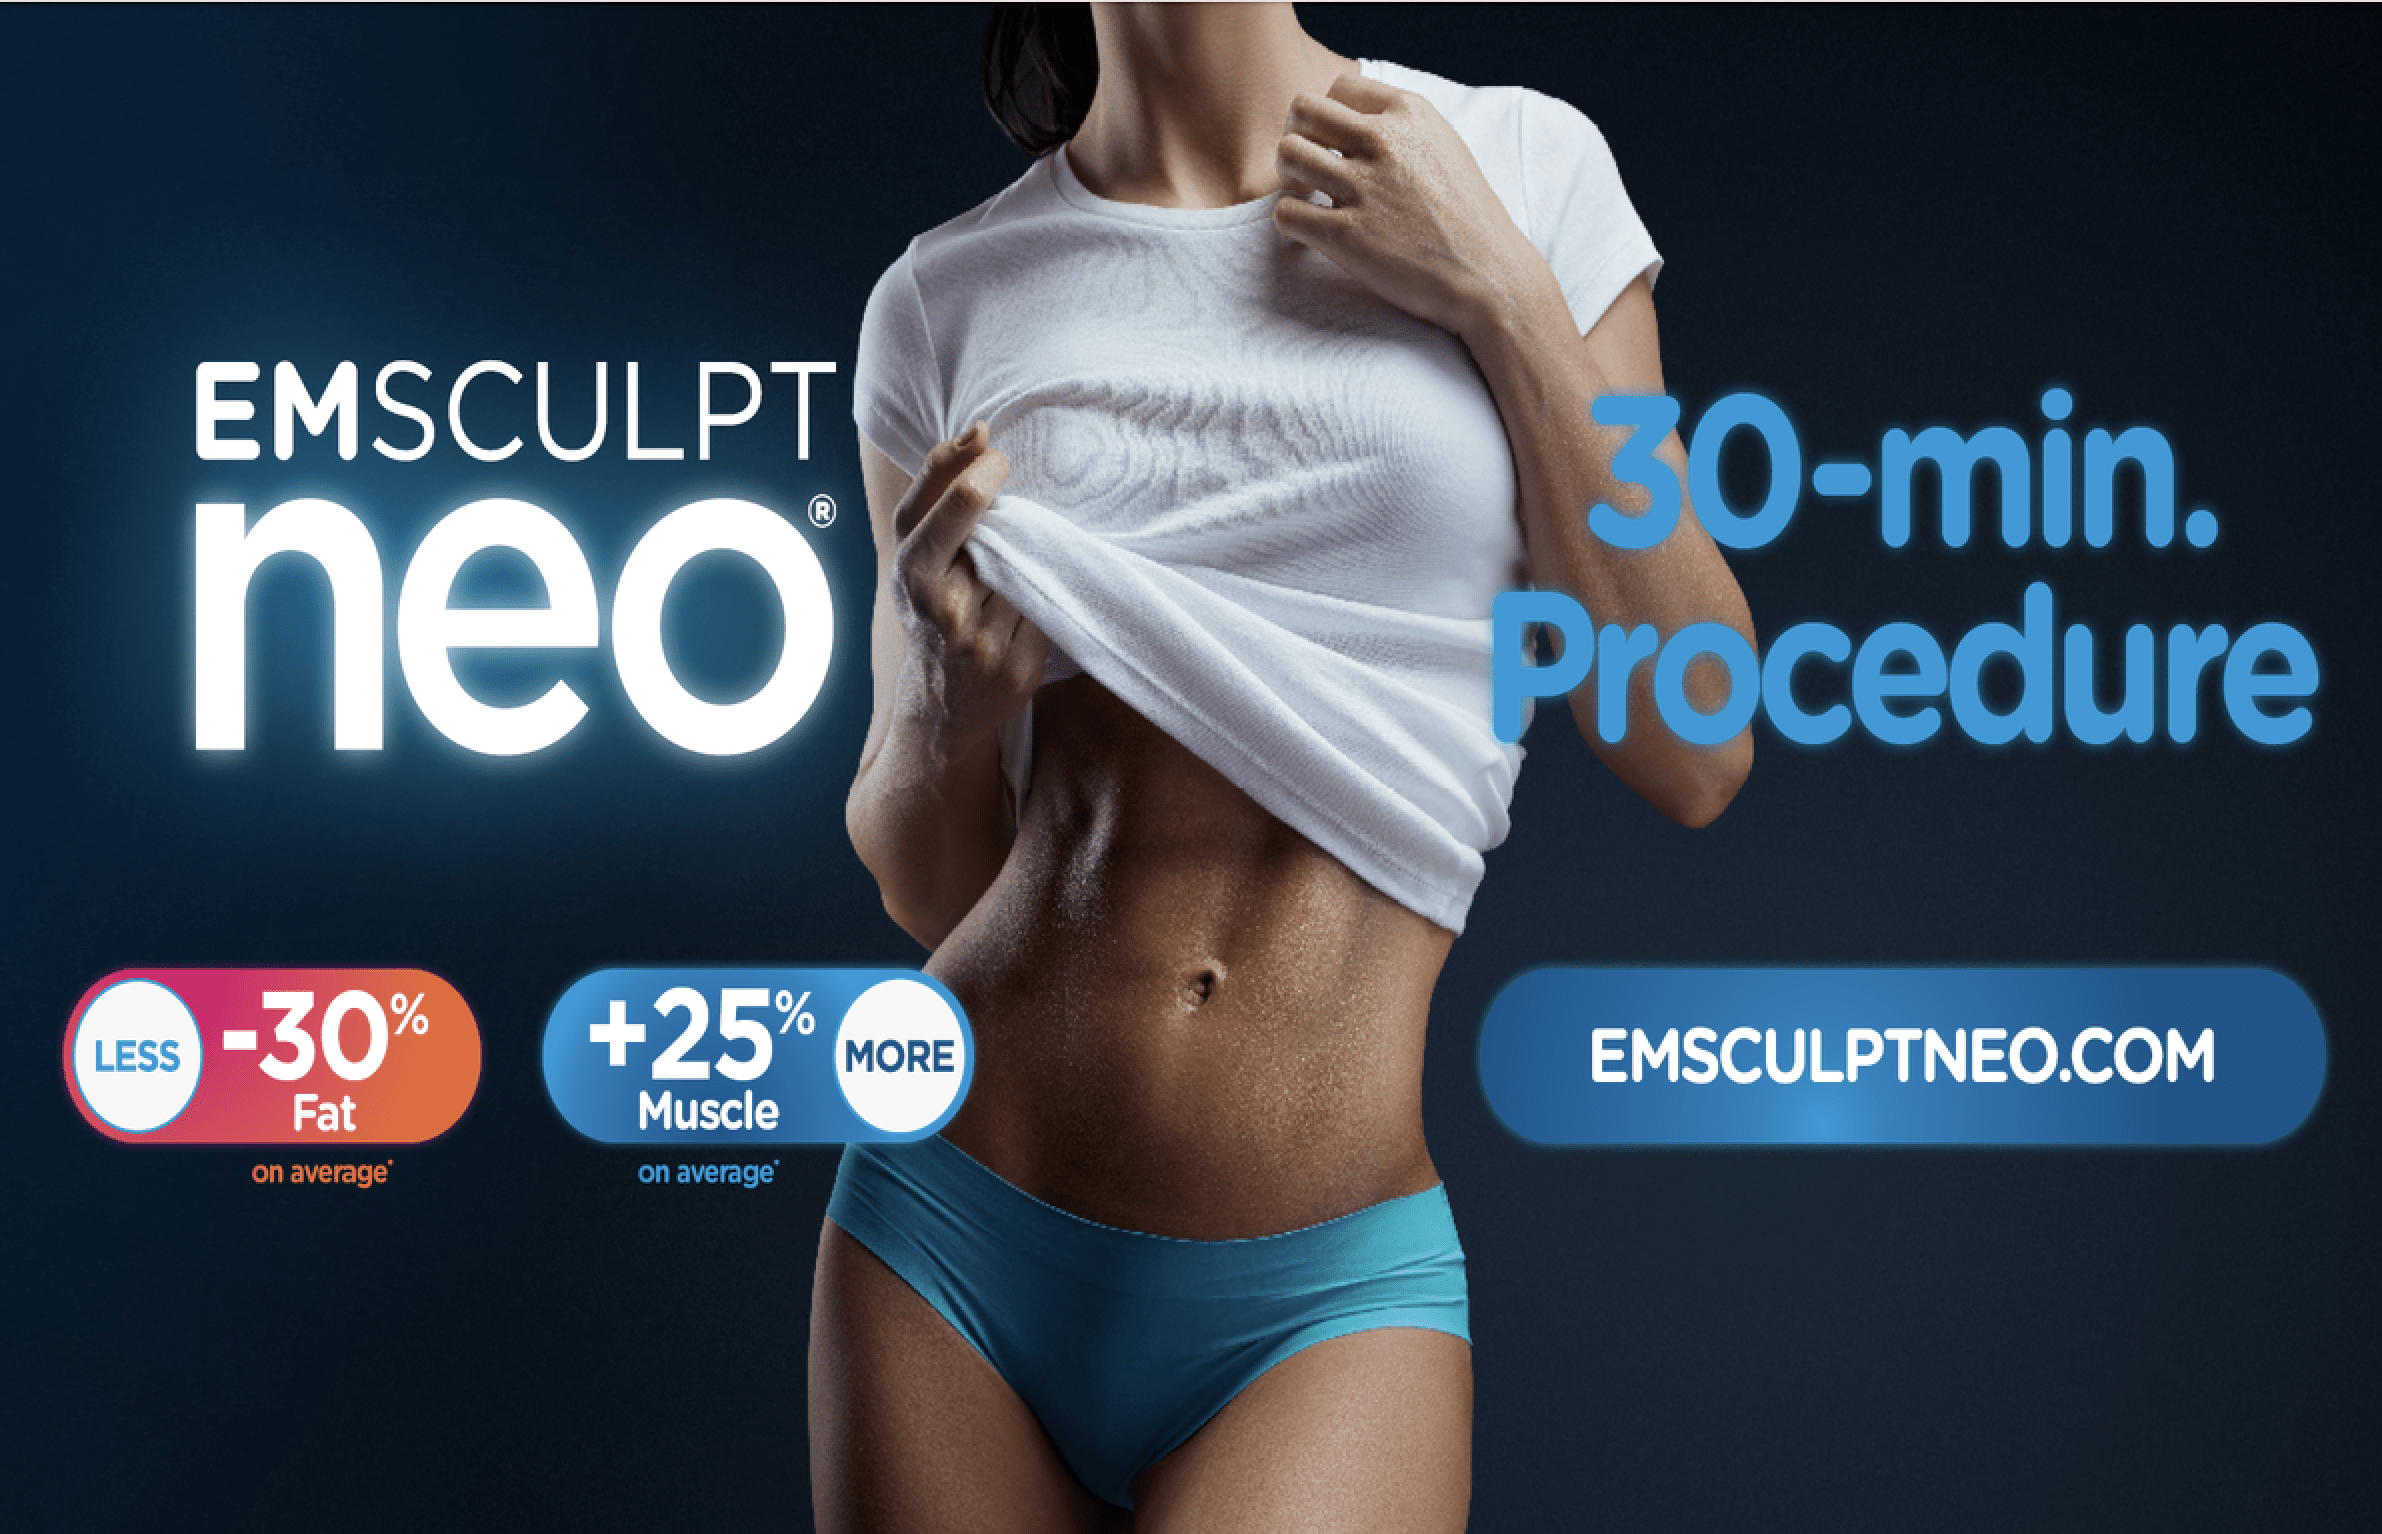 EMSCULPT NEO, that on average provides 25% more muscle and 30% less fat. Because EMSCULPT NEO simultaneously delivers two technologies in a single therapy. You save time and money. Talk about more for less. Take the first step to reclaiming your body and confidence by booking a complementary consultation